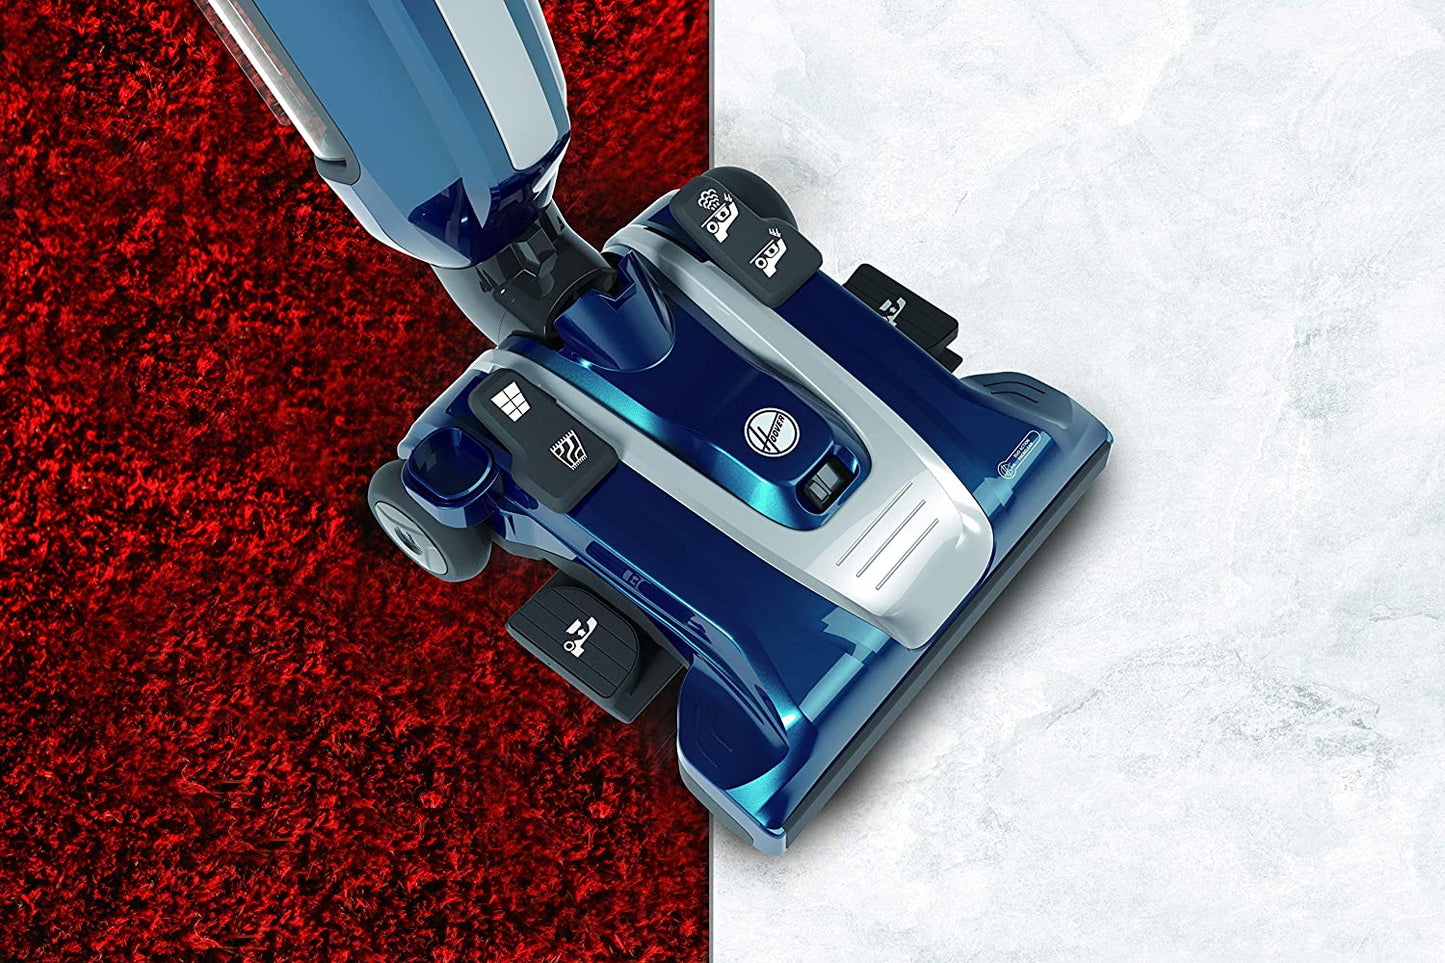 HOOVER HPS700 H-PURE STEAM CLEANER